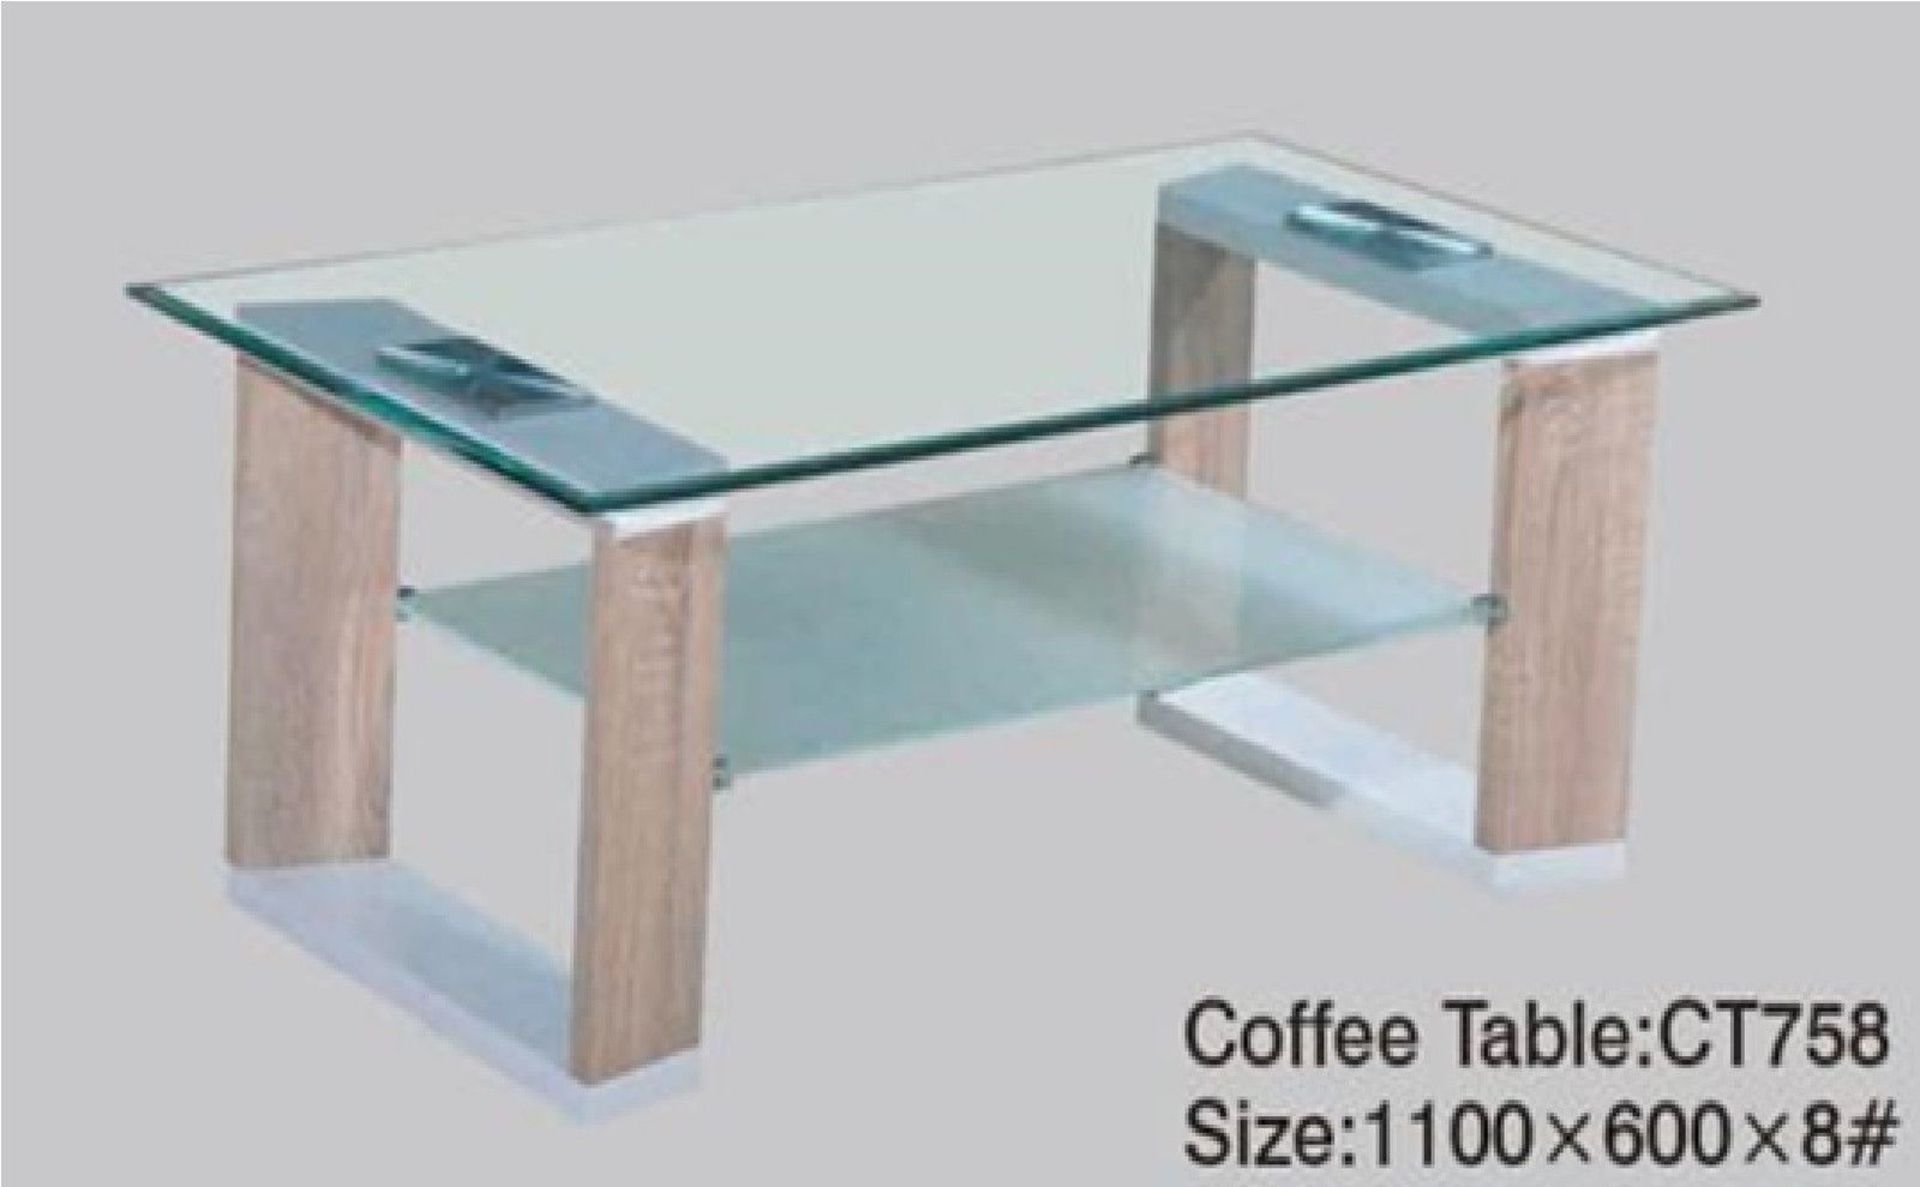 1 BRAND NEW BOXED HOMESTUFF PLUS CT758 COFFEE TABLE